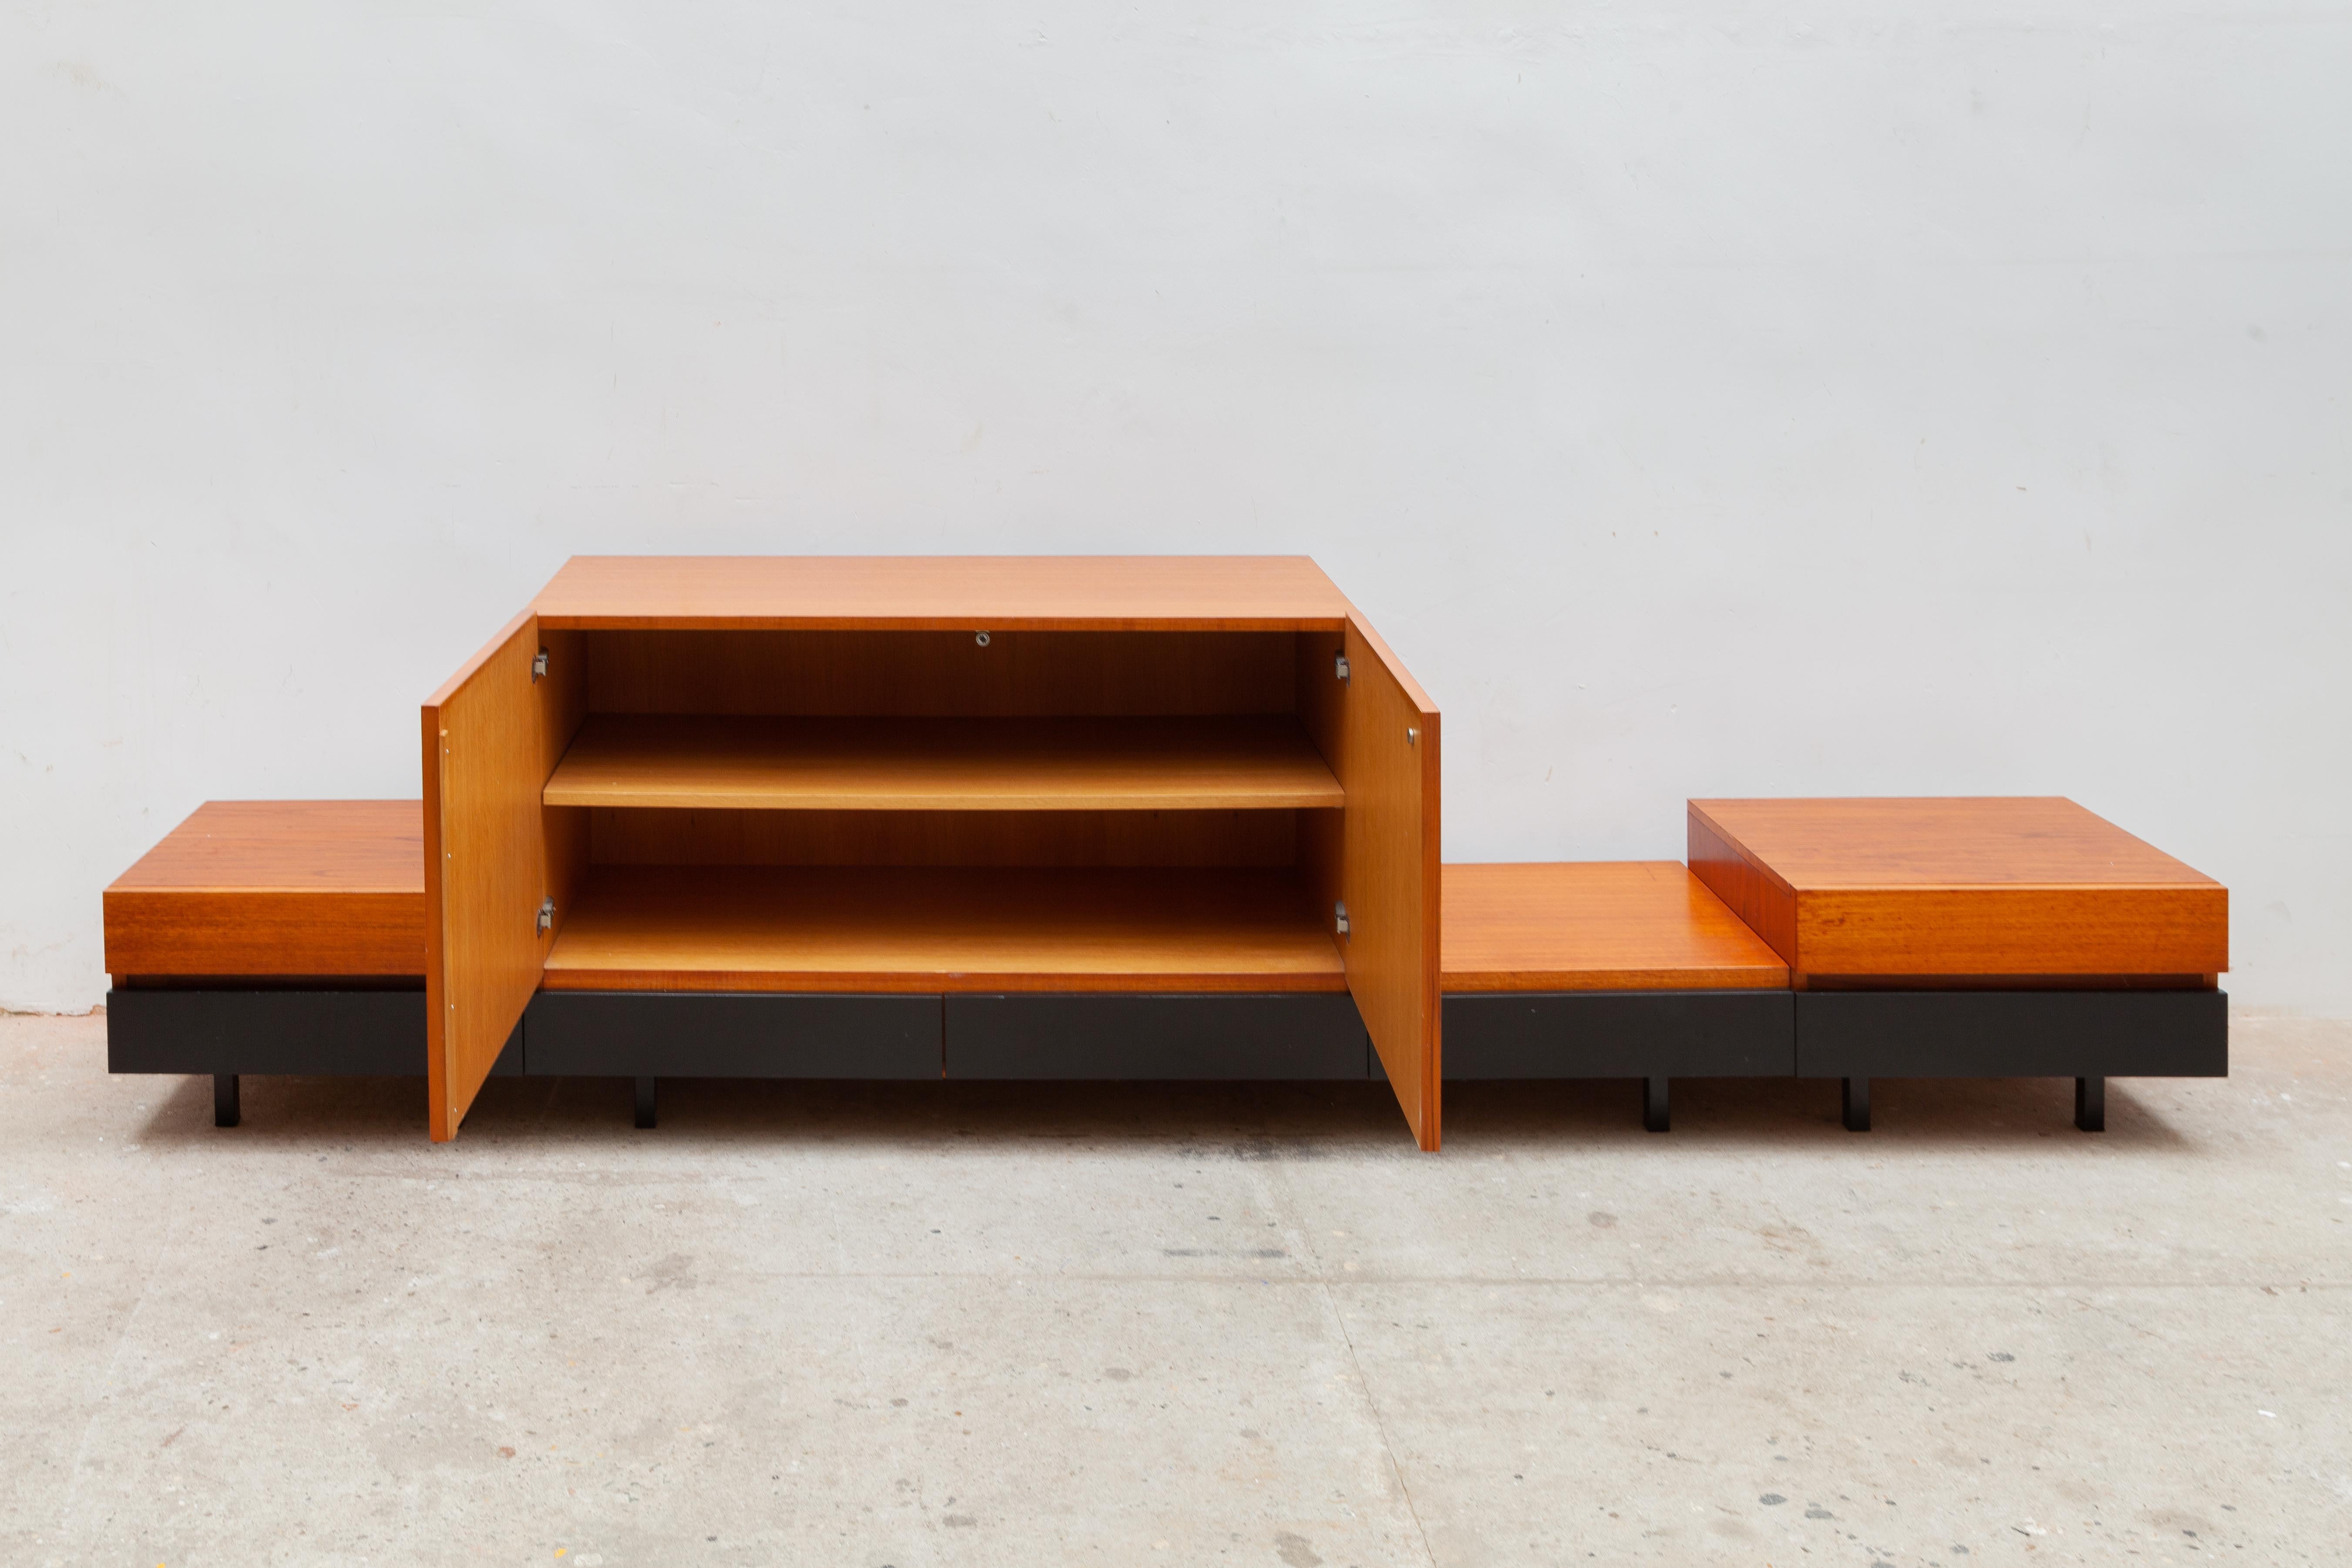 Midcentury designed sideboard with 2 modular side pieces also usable as a side table. Labeled by V-Form manufacture, 1960s.

Dimensions: W.248cm-H.66cm-D.45cm/Modular parts W.50cm-H.32cm-D.42